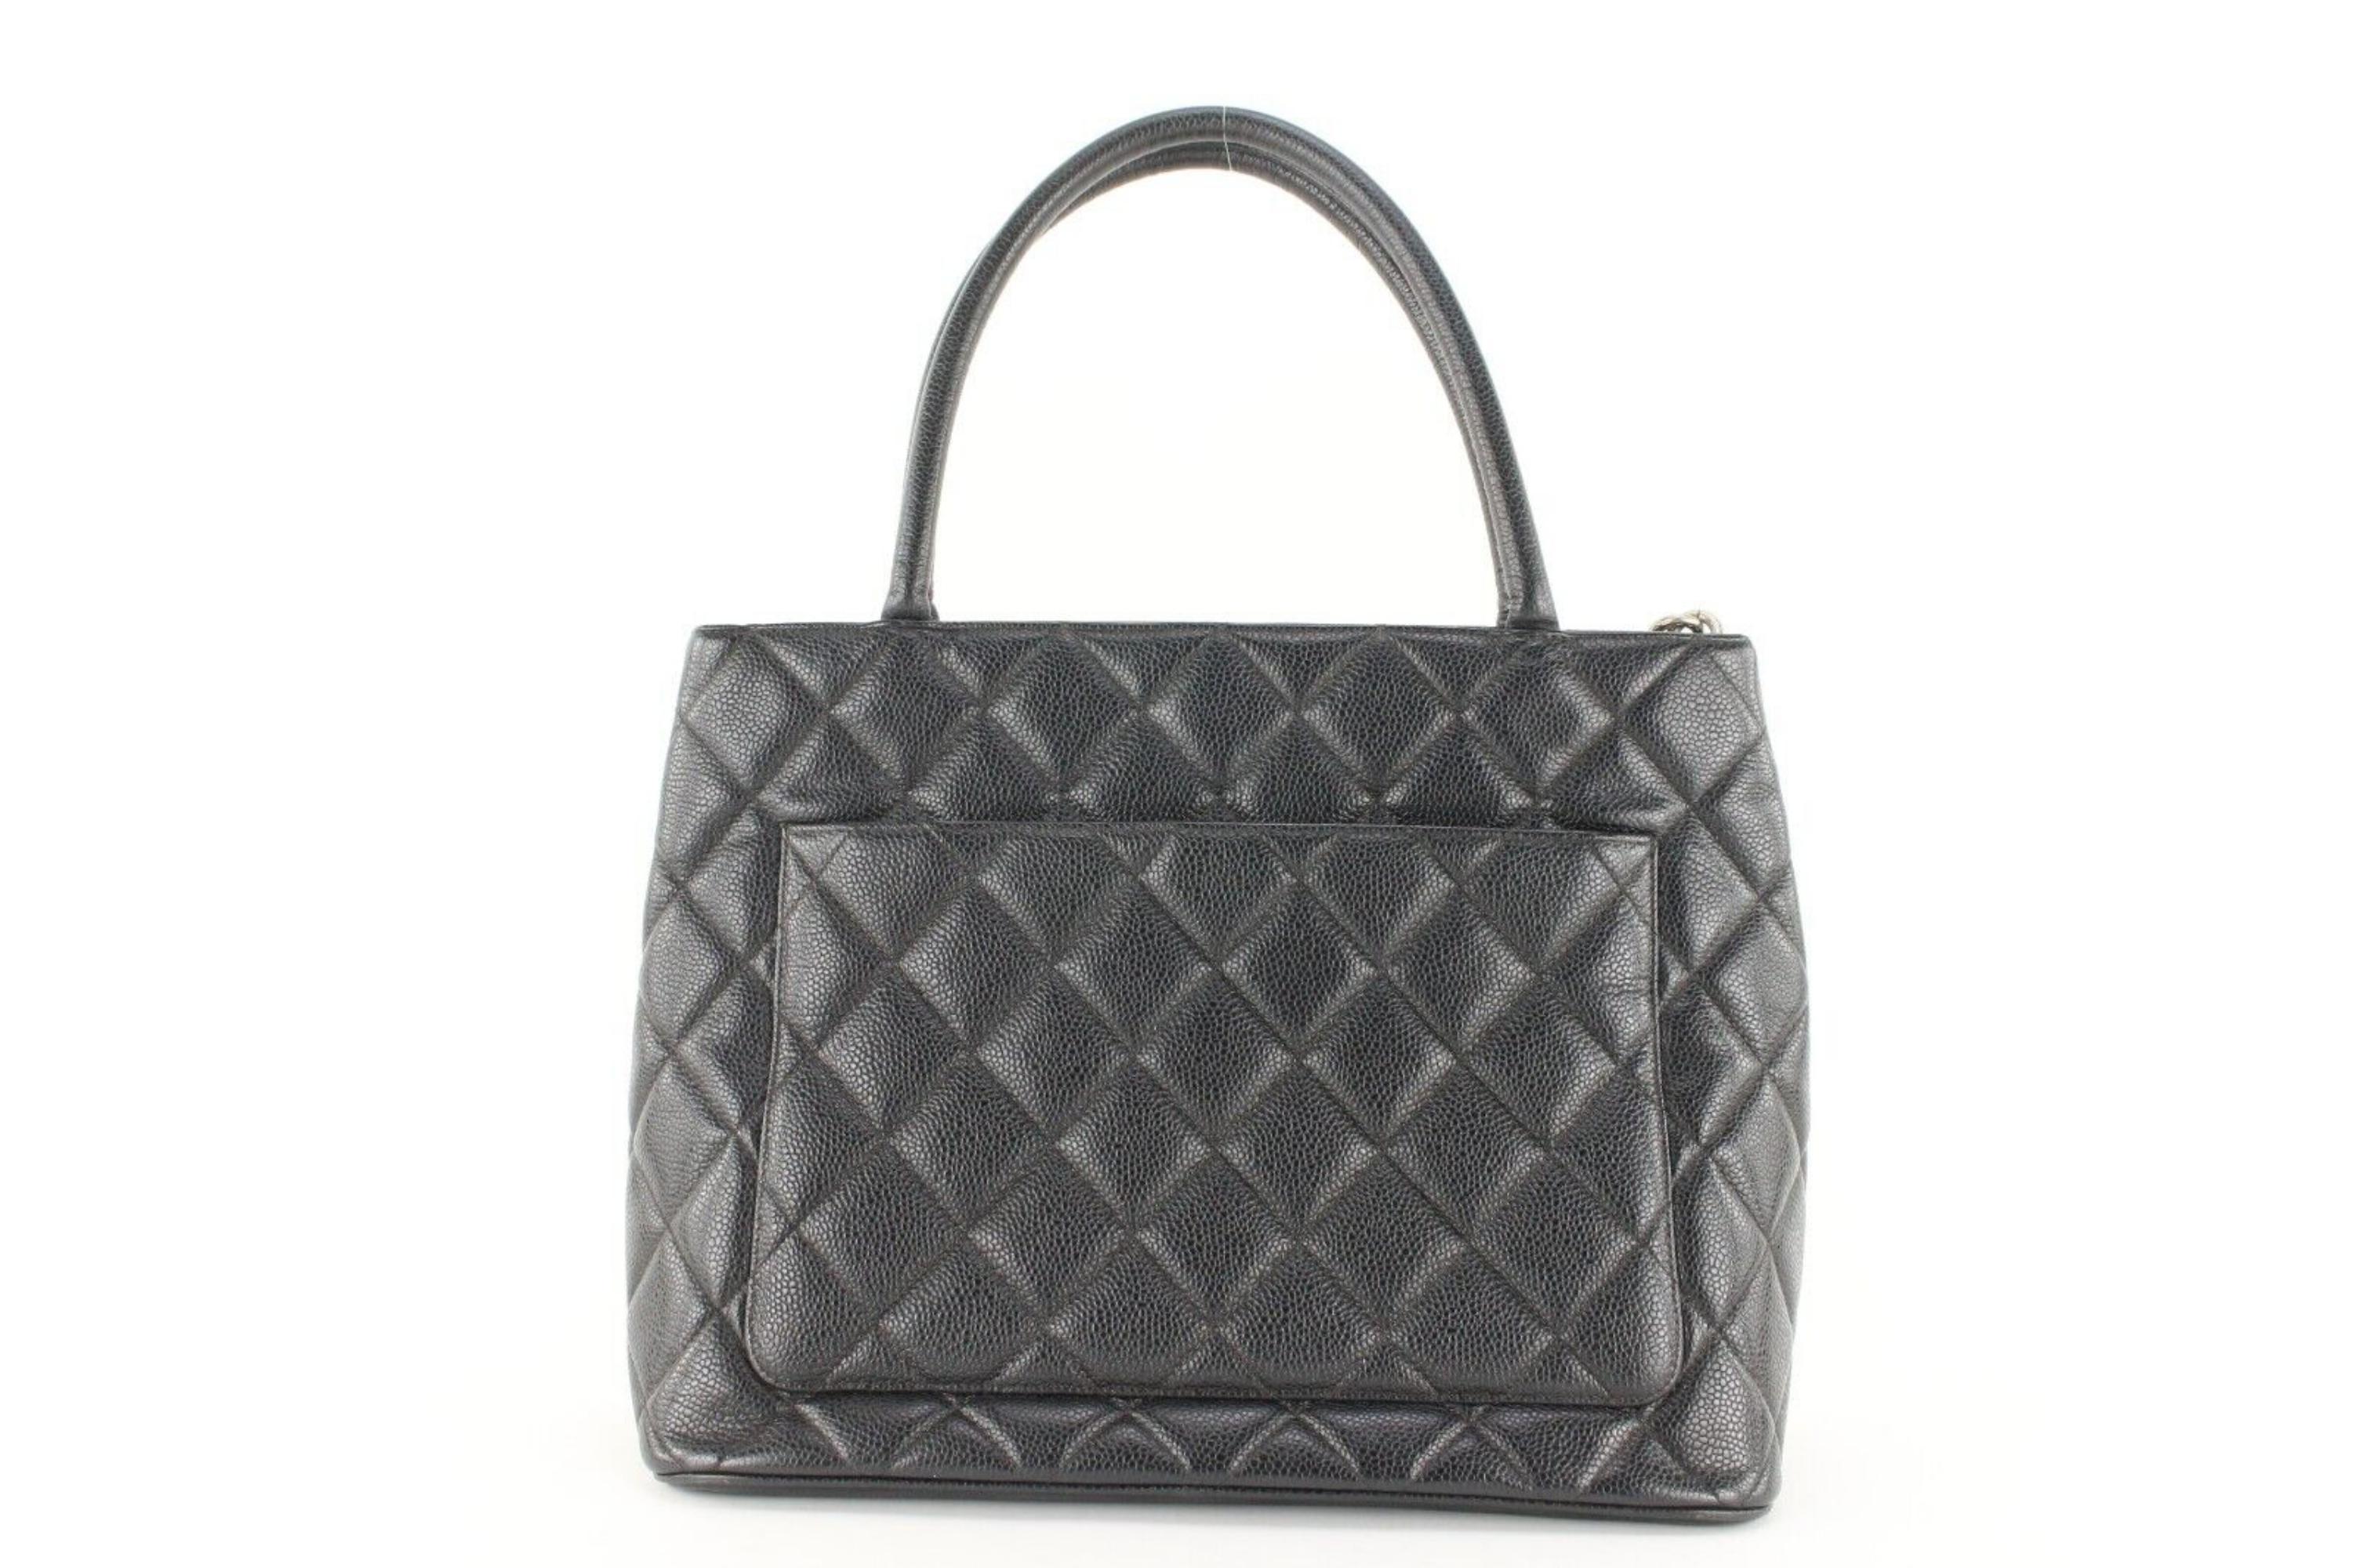 Chanel Black Quilted Caviar Leather Medallion Zip Tote SHW 1CC1101 In Excellent Condition For Sale In Dix hills, NY